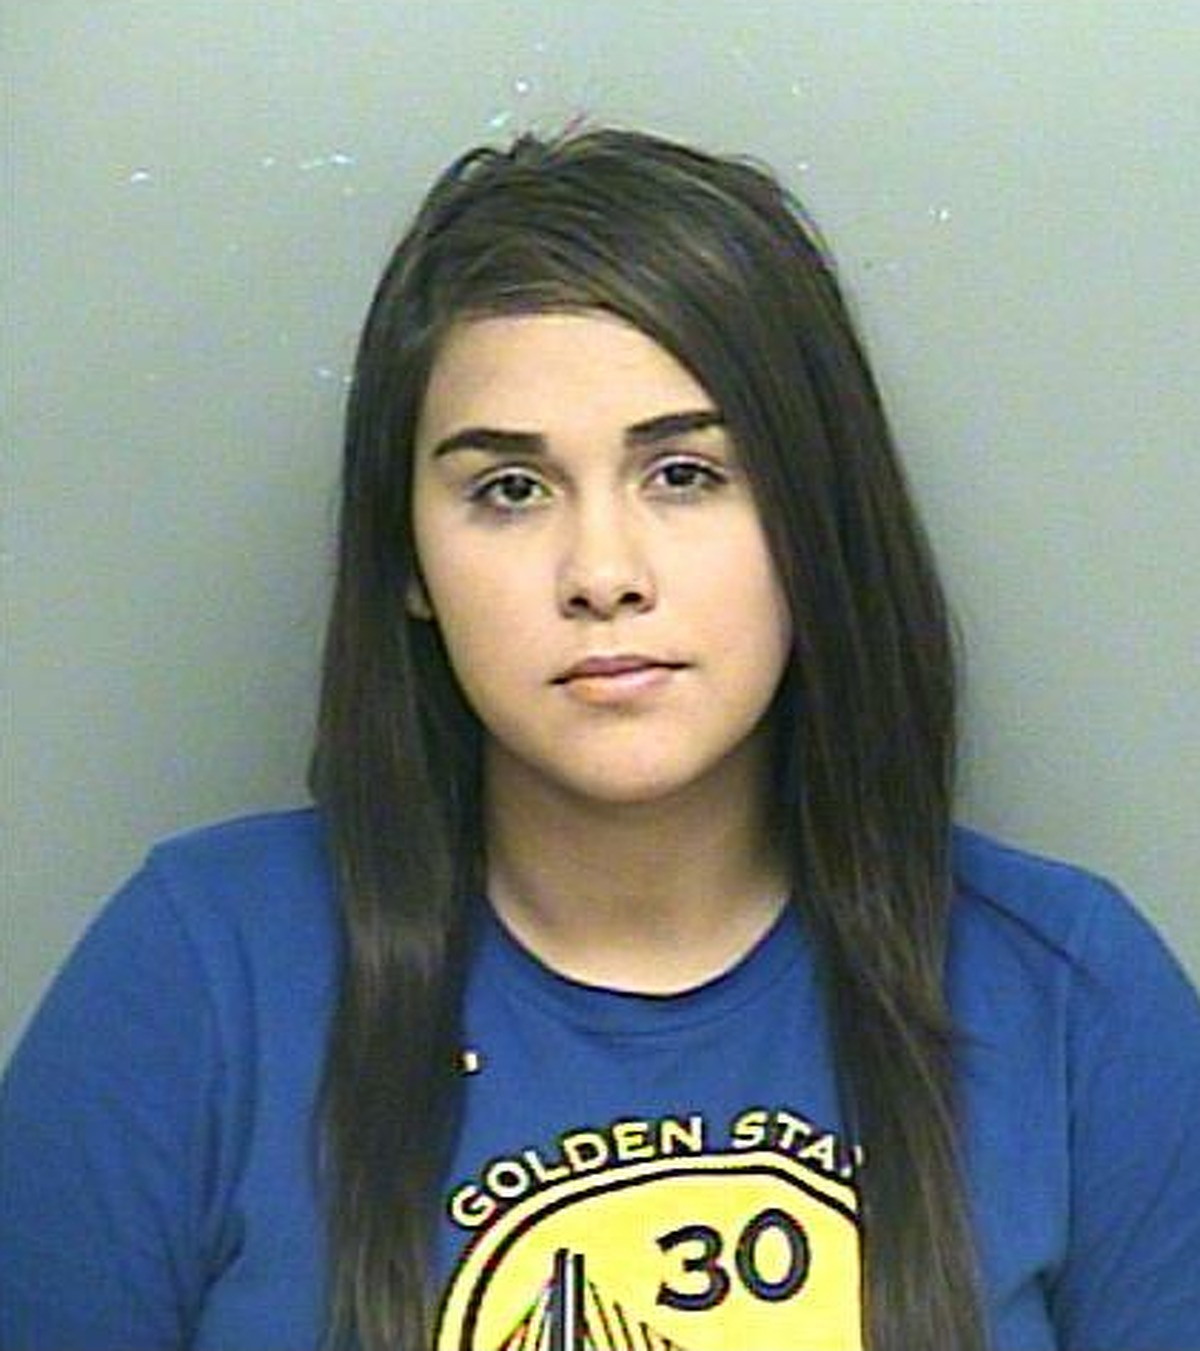 According to the Montgomery County Sheriff's Office, Alexandria Vera, 24, turned herself in to officials in Conroe Wednesday morning, June 1, 2016. She is accused in Harris County of the continuous sexual abuse of a child, a former student of hers at an Aldine Independent School District middle school. 